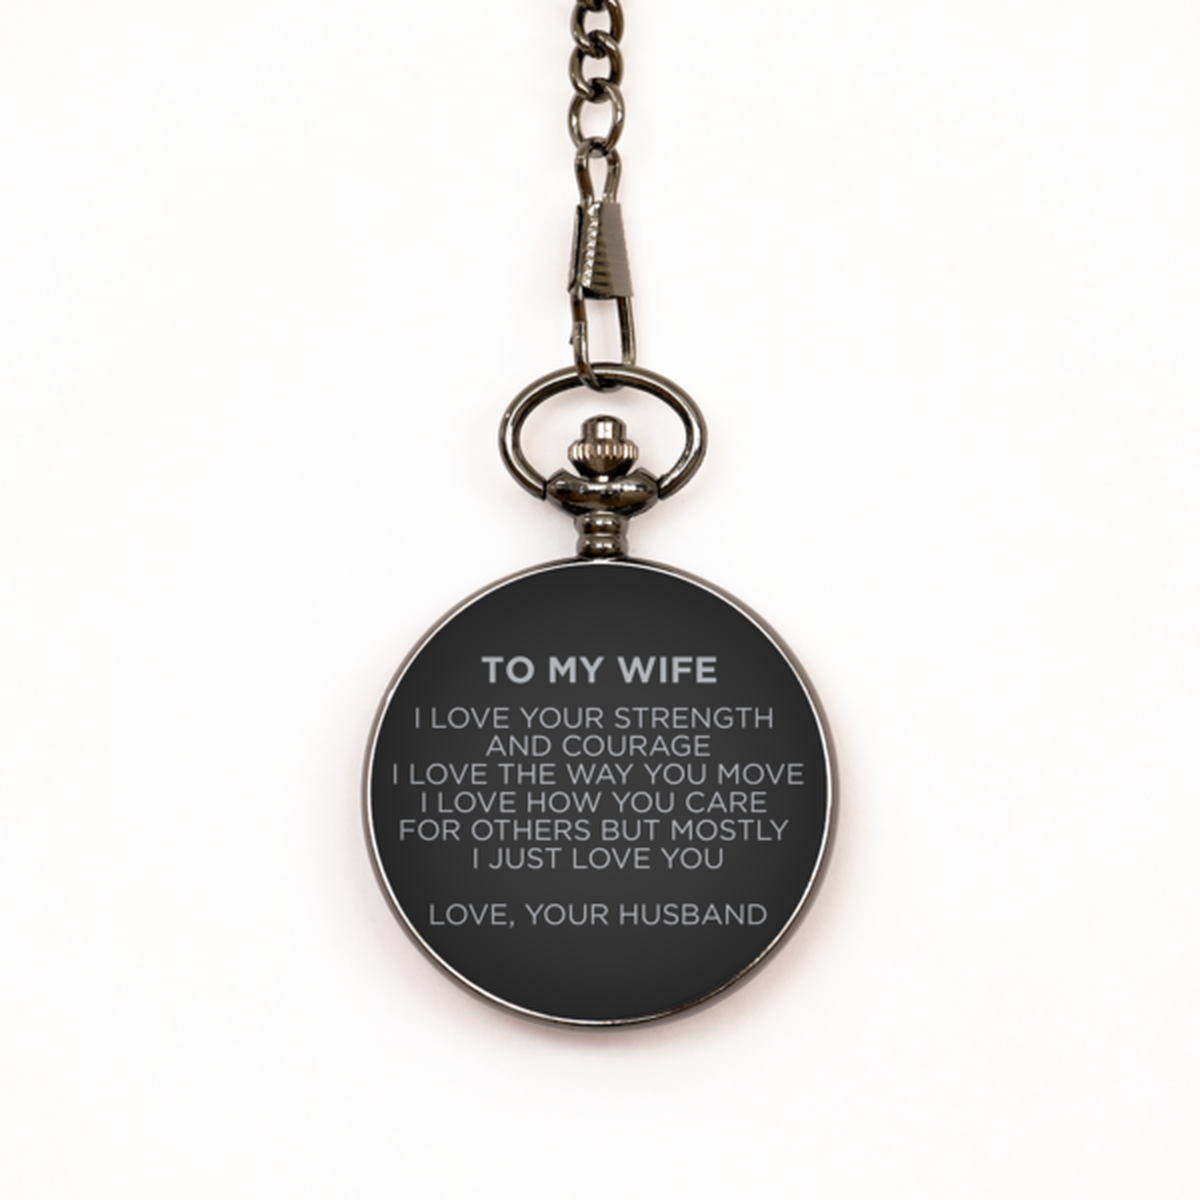 To My Wife Black Pocket Watch, I Just Love, Birthday Gifts For Wife From Husband, Valentines Gifts For Women